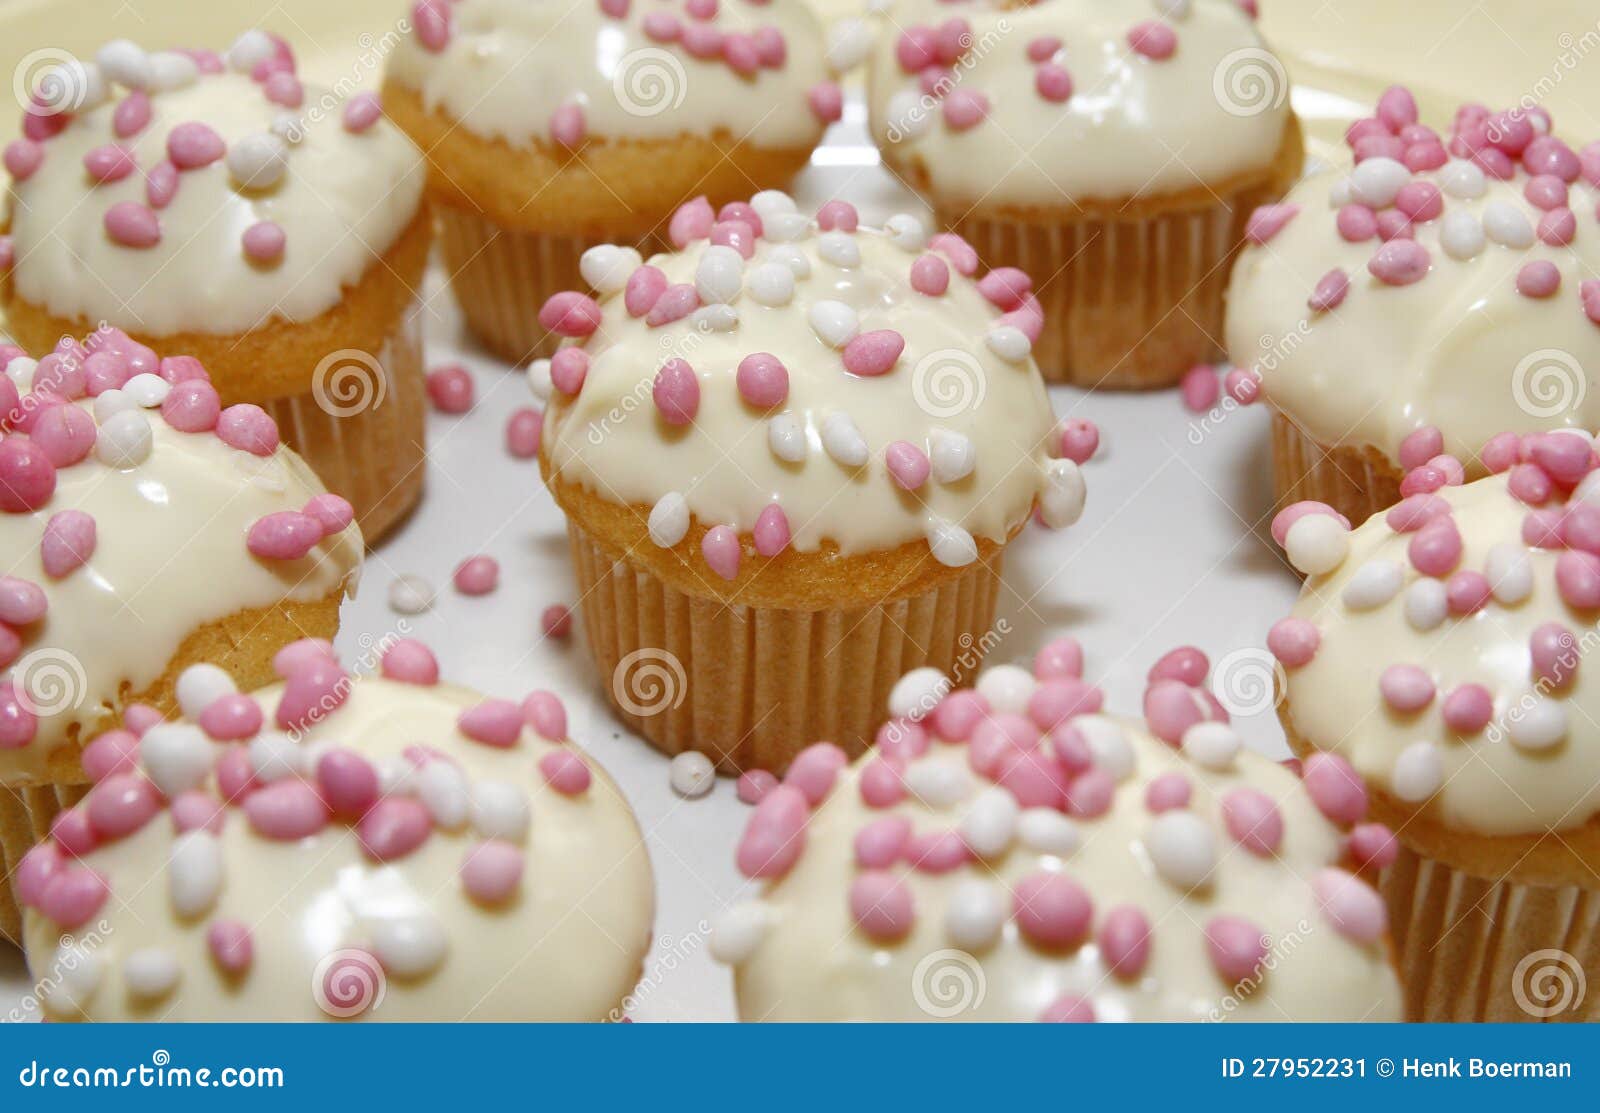 Muffins with Pink and White Mice Stock Image - Image of rusk, food ...